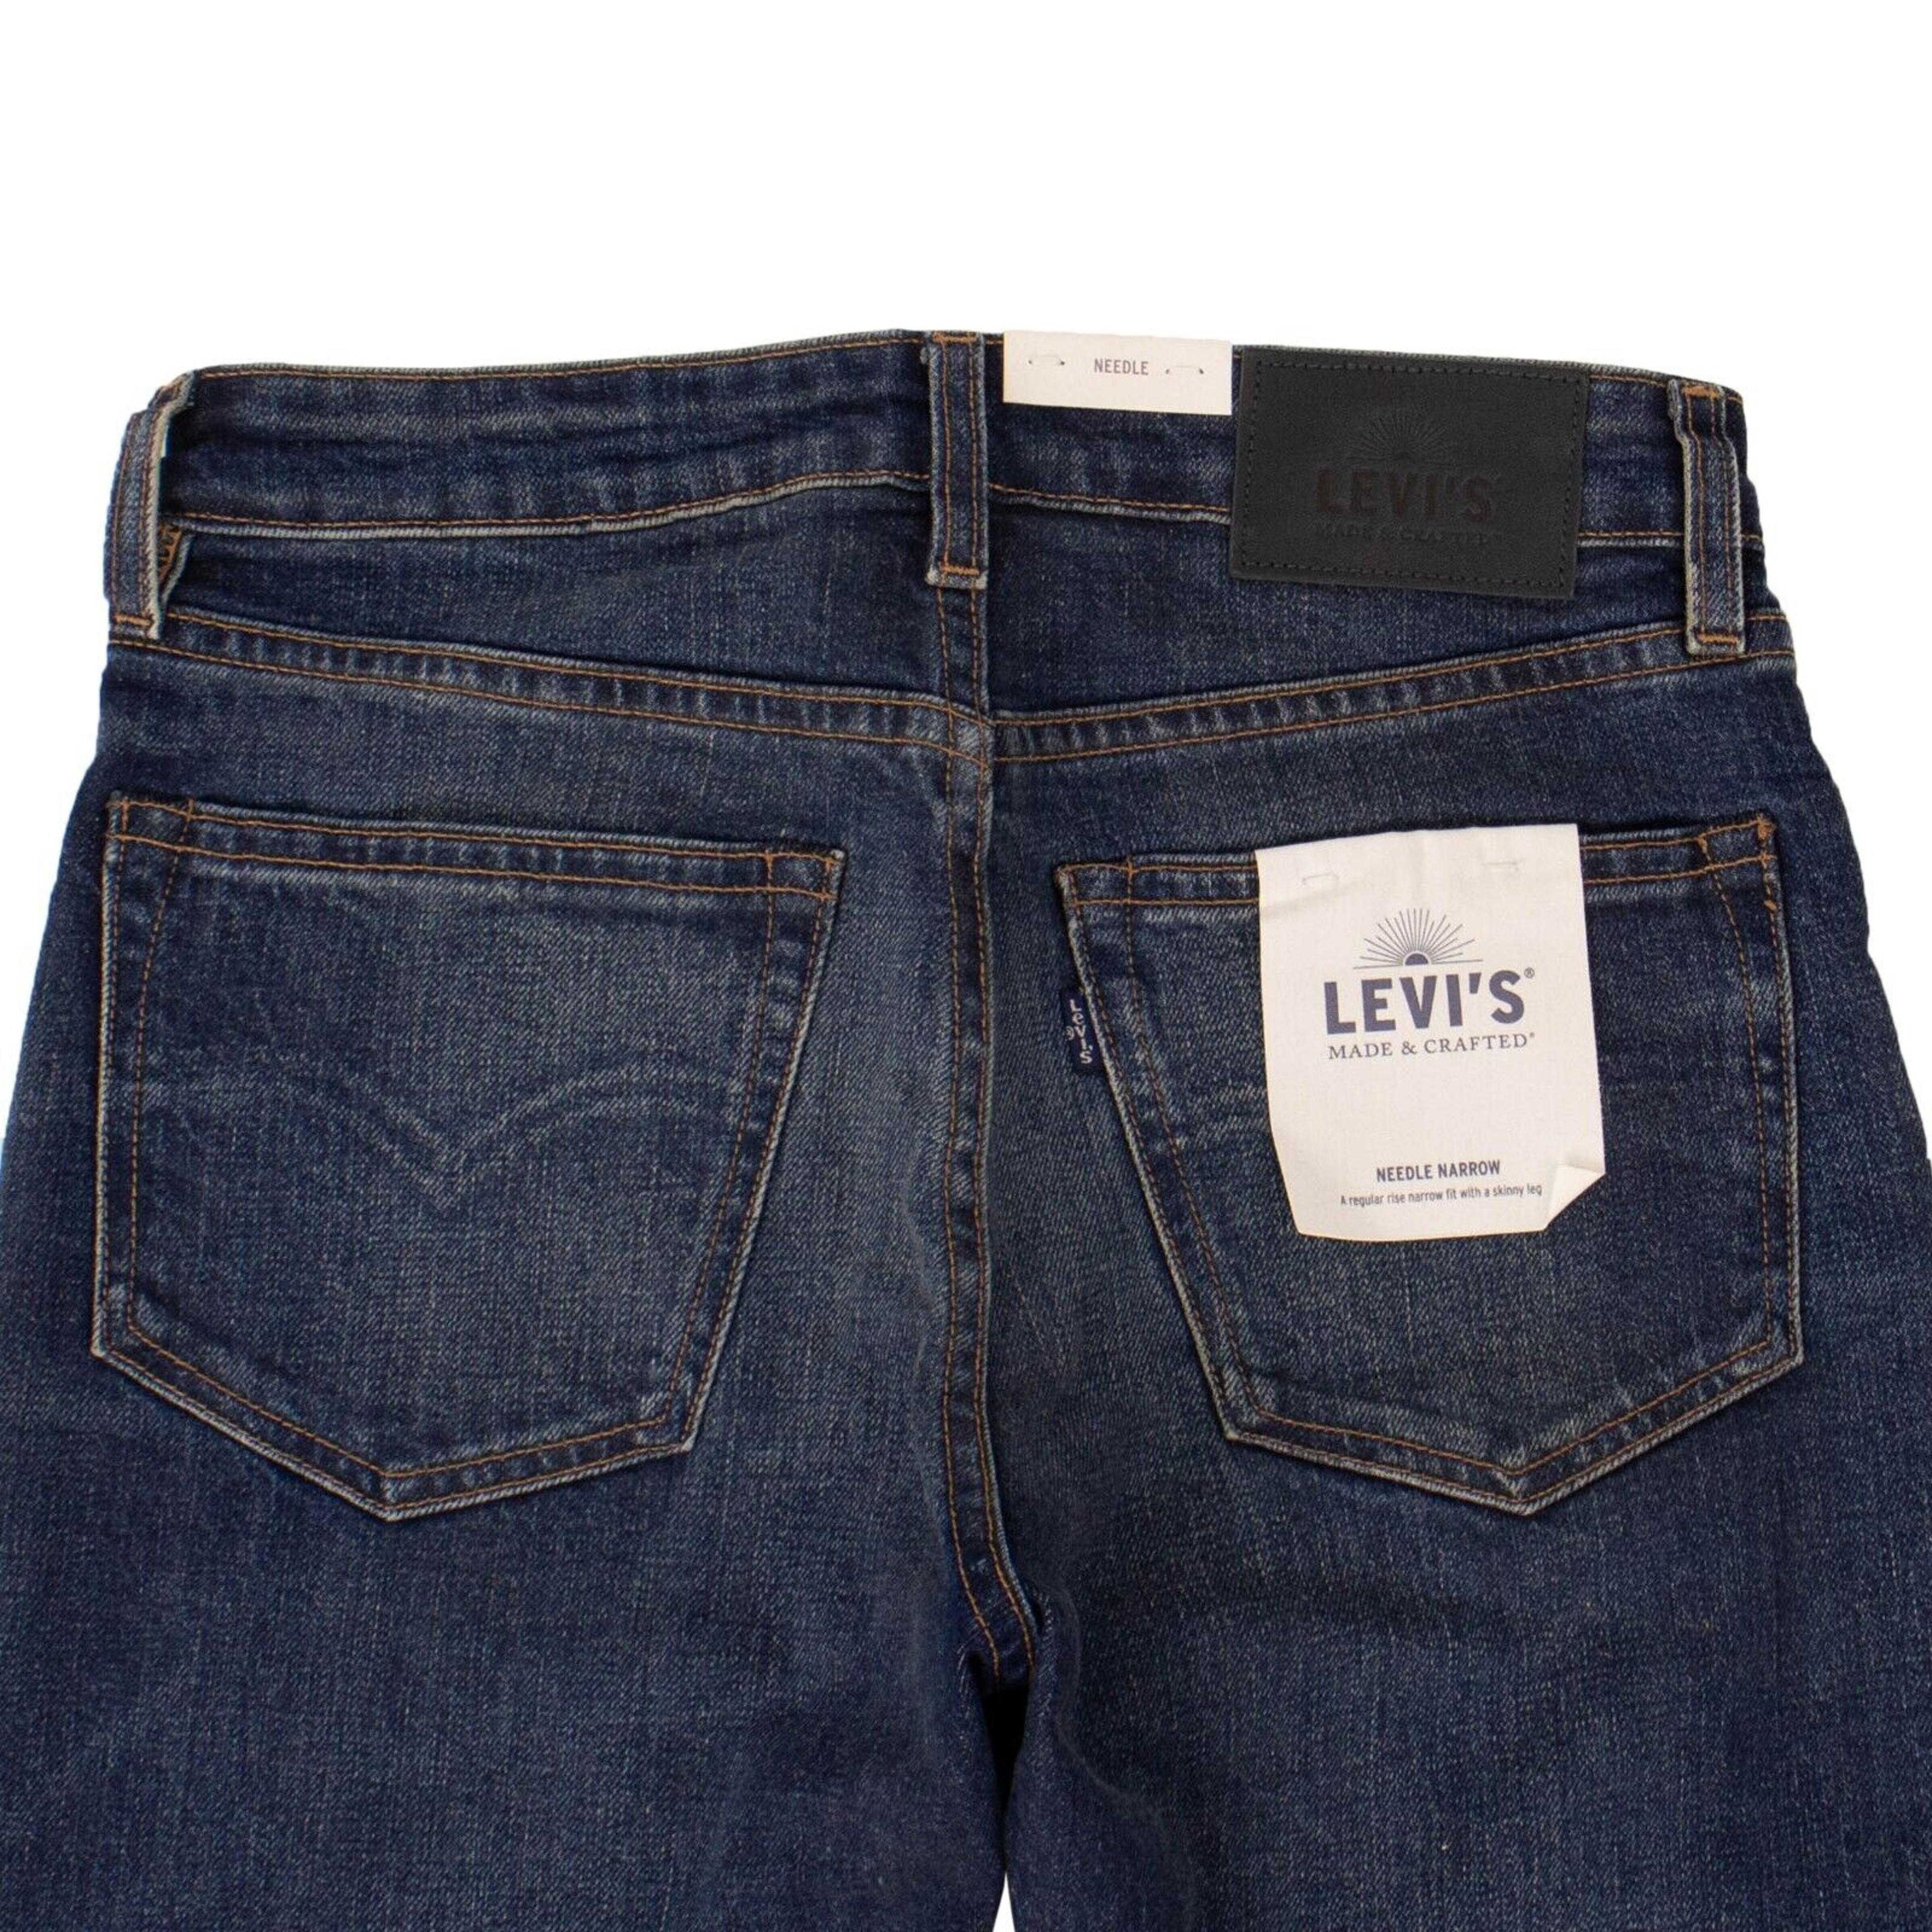 Alternate View 3 of Levi'S Made & Crafted Chiba Needle Narrow Denim Jeans - Dark Was